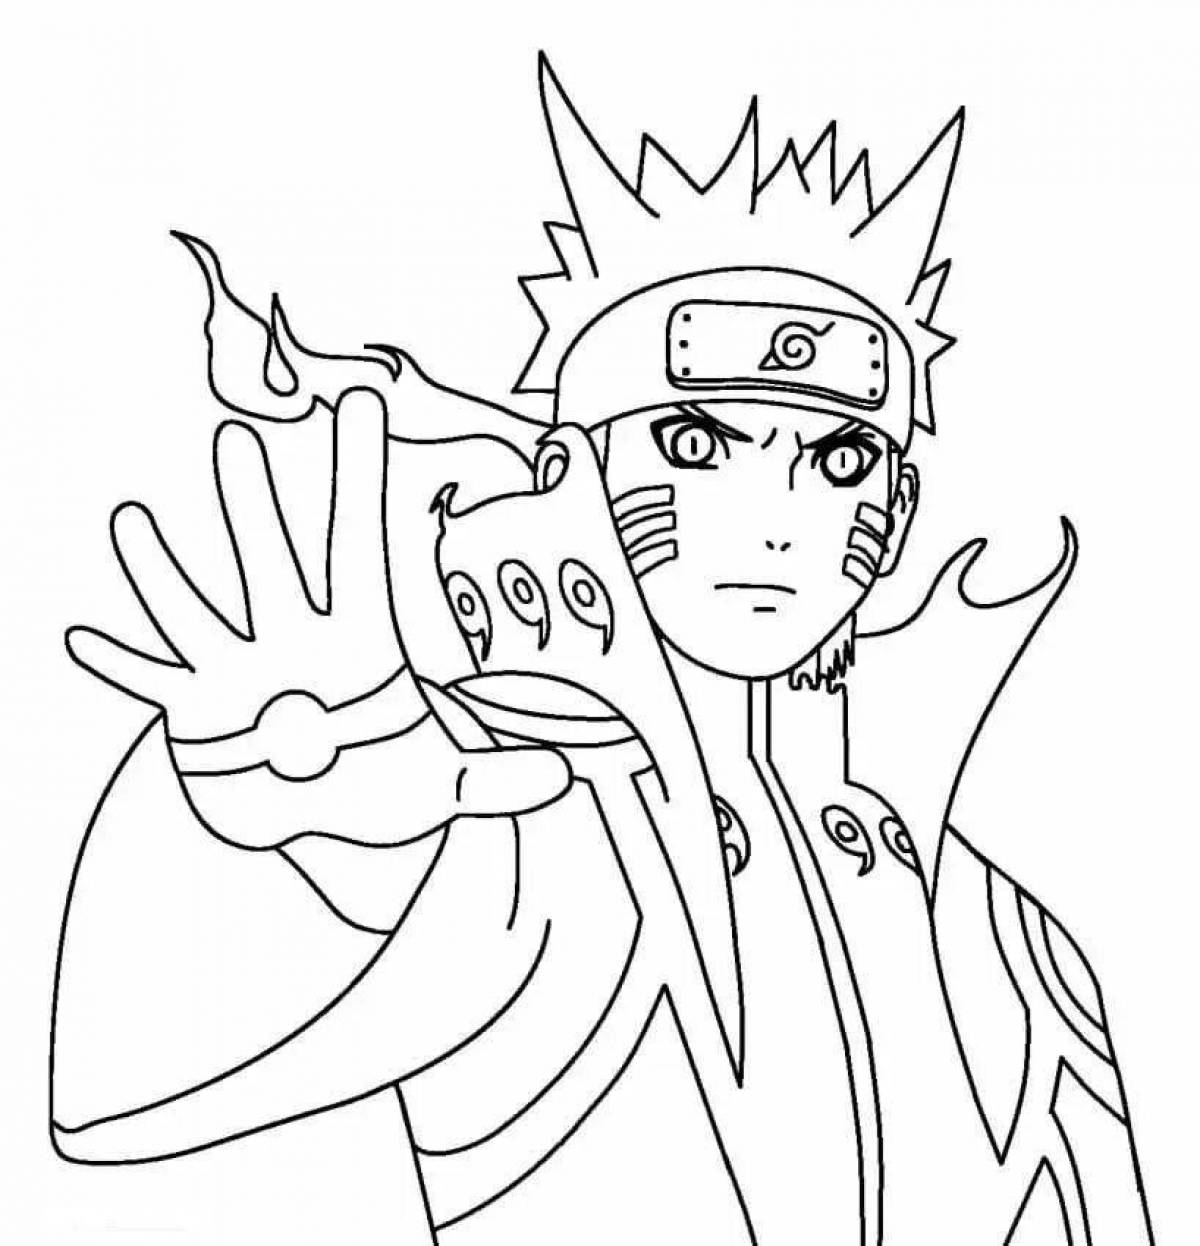 Fabulous naruto coloring pages for boys